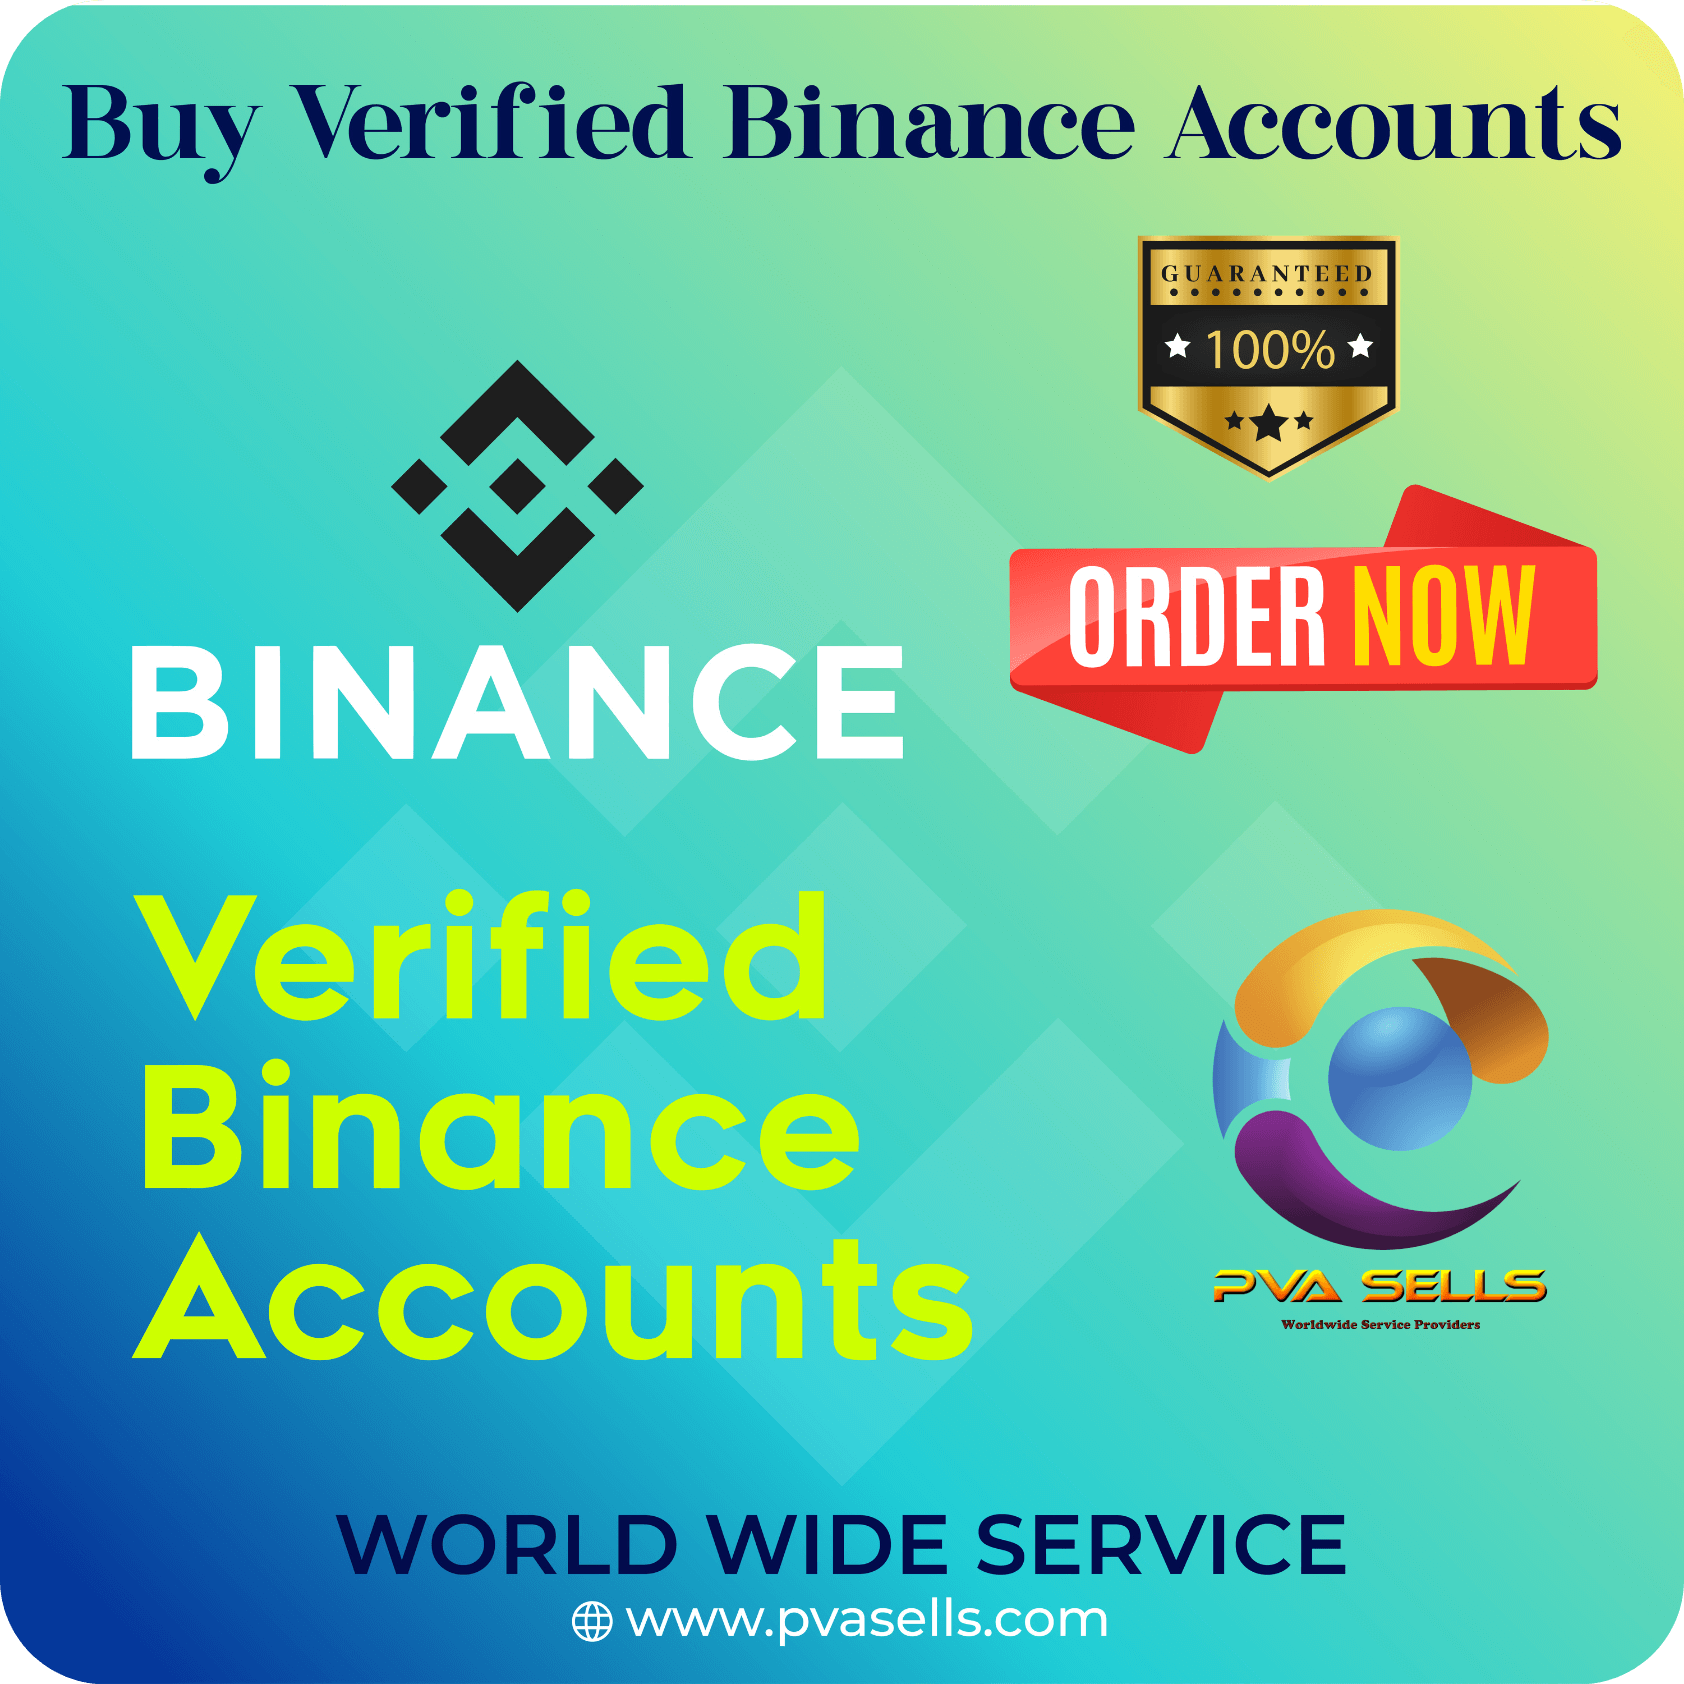 how long does it take to get verified on binance.us